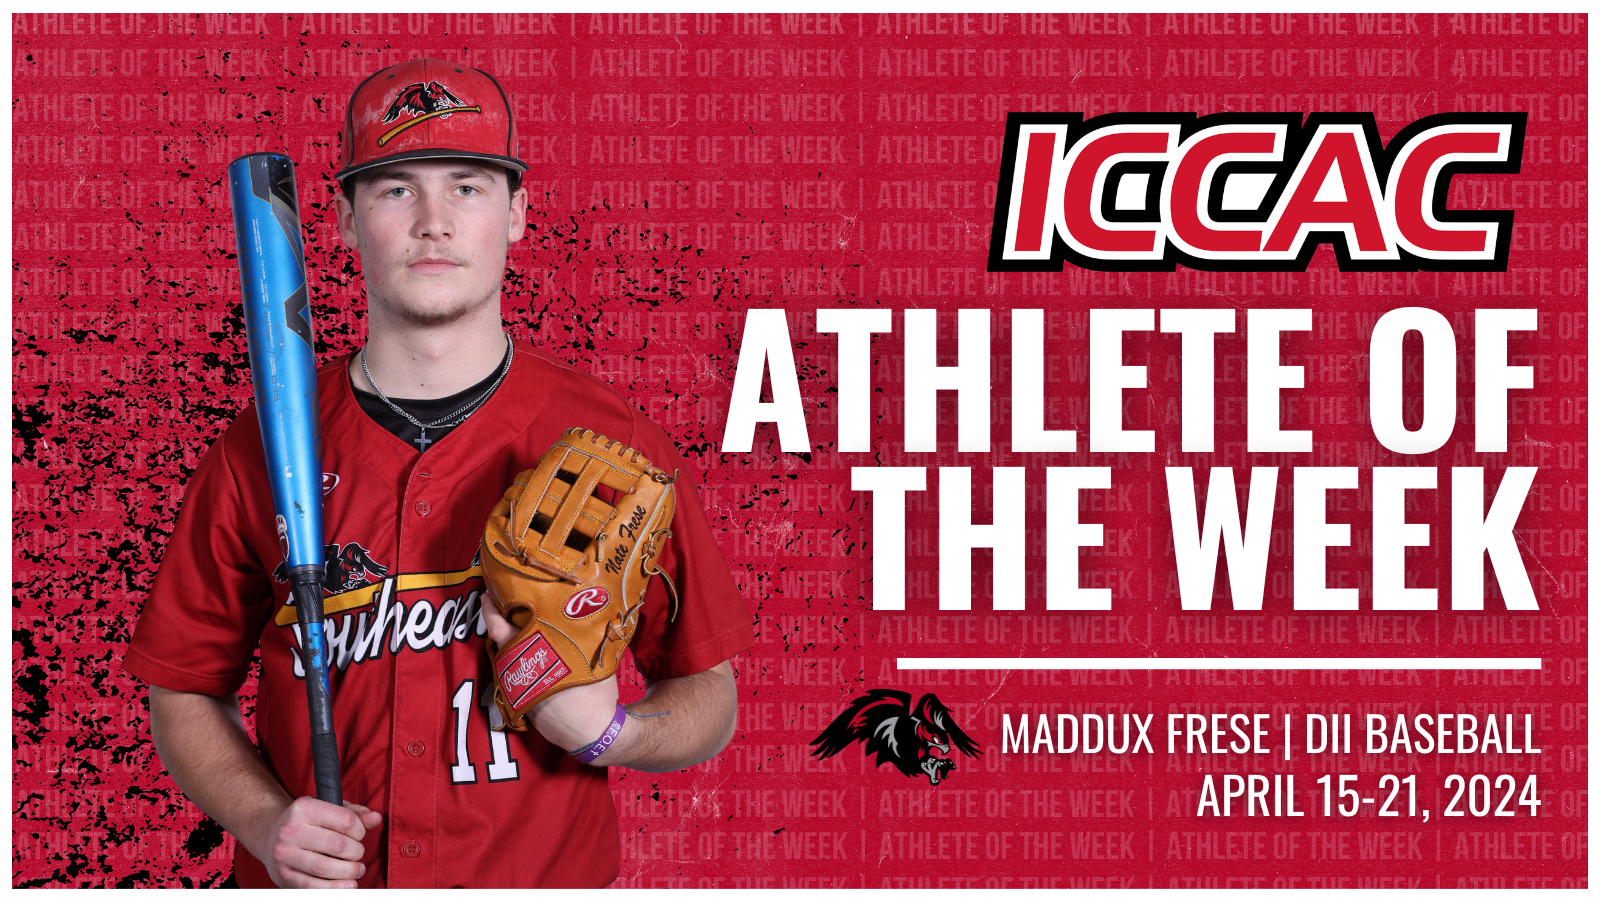 FRESE EARNS ICCAC ATHLETE OF THE WEEK HONORS IN DII BASEBALL